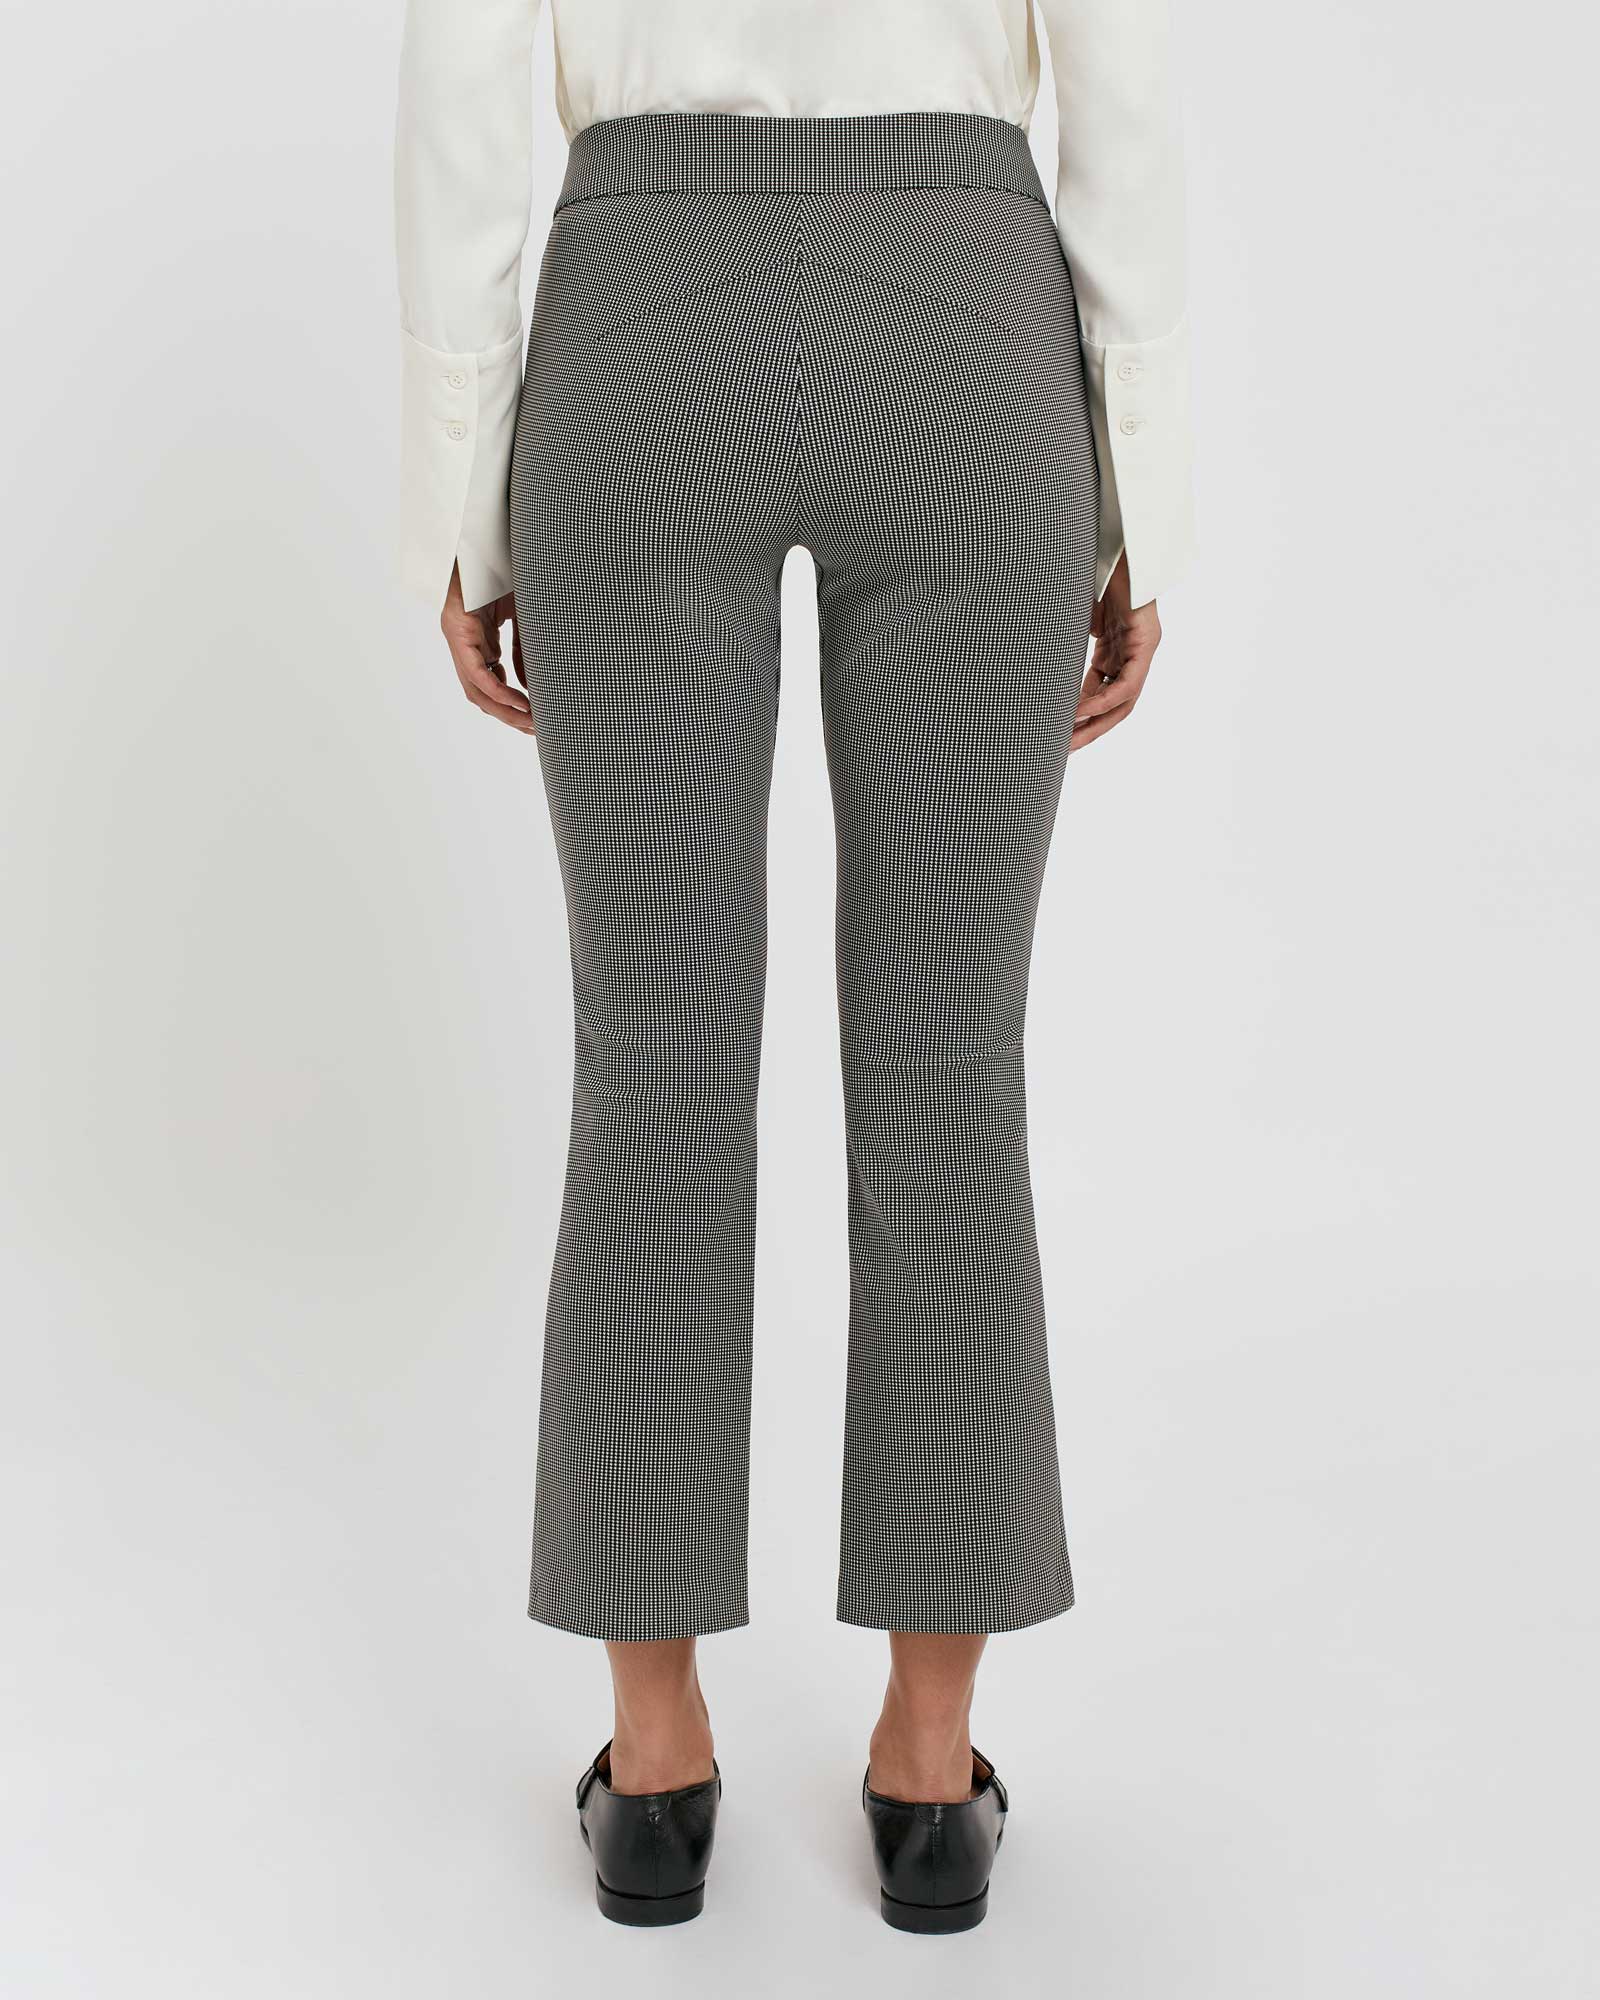 Flare Game Trousers Dogstooth 2.0 - Final Sale